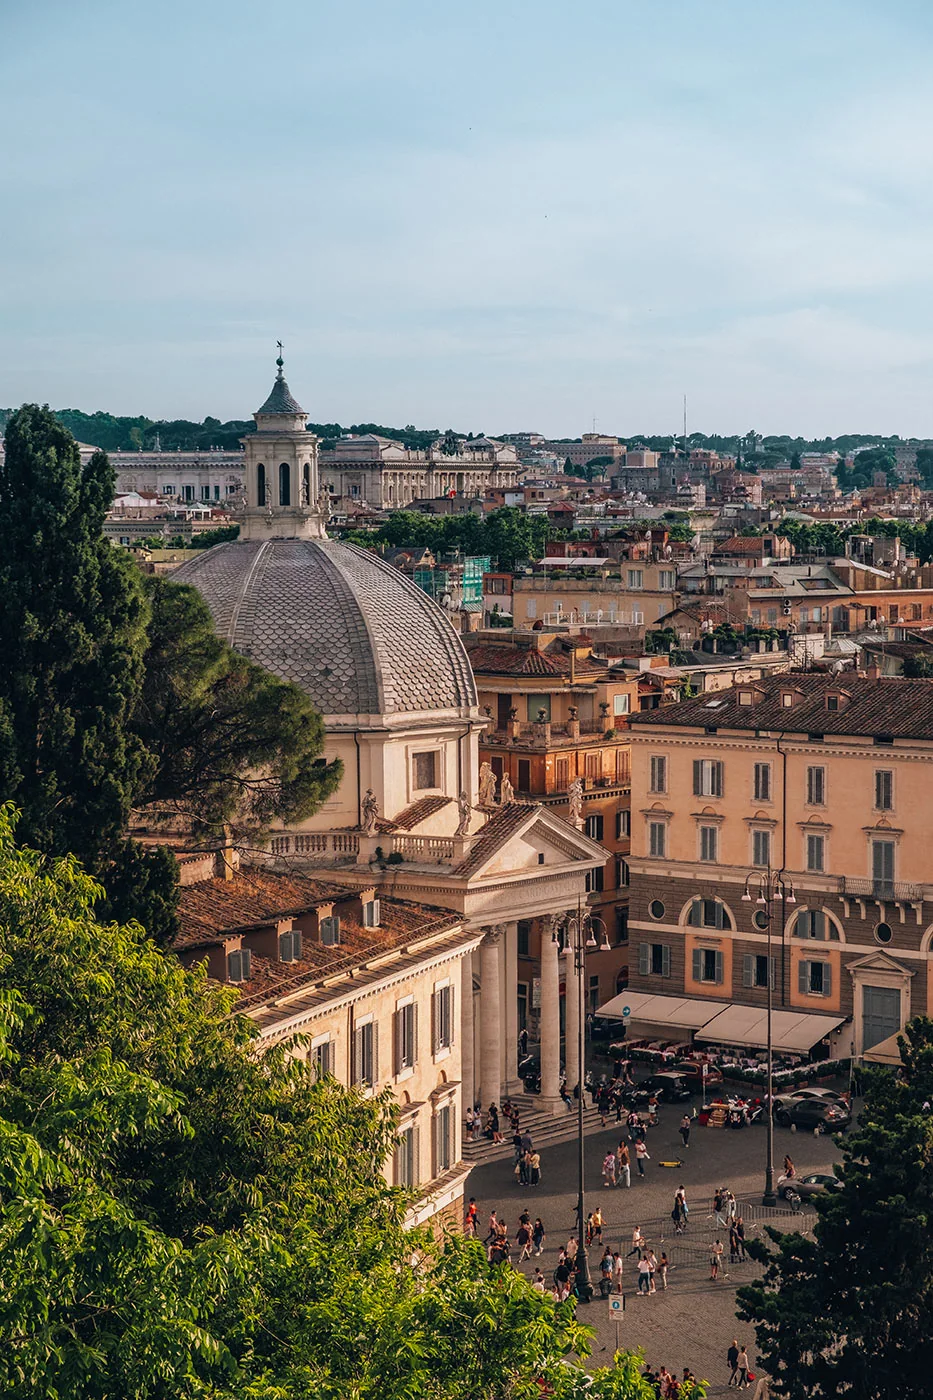 Rome 3 Day Itinerary - Things to do in Rome in 3 days - Piazza del Popolo